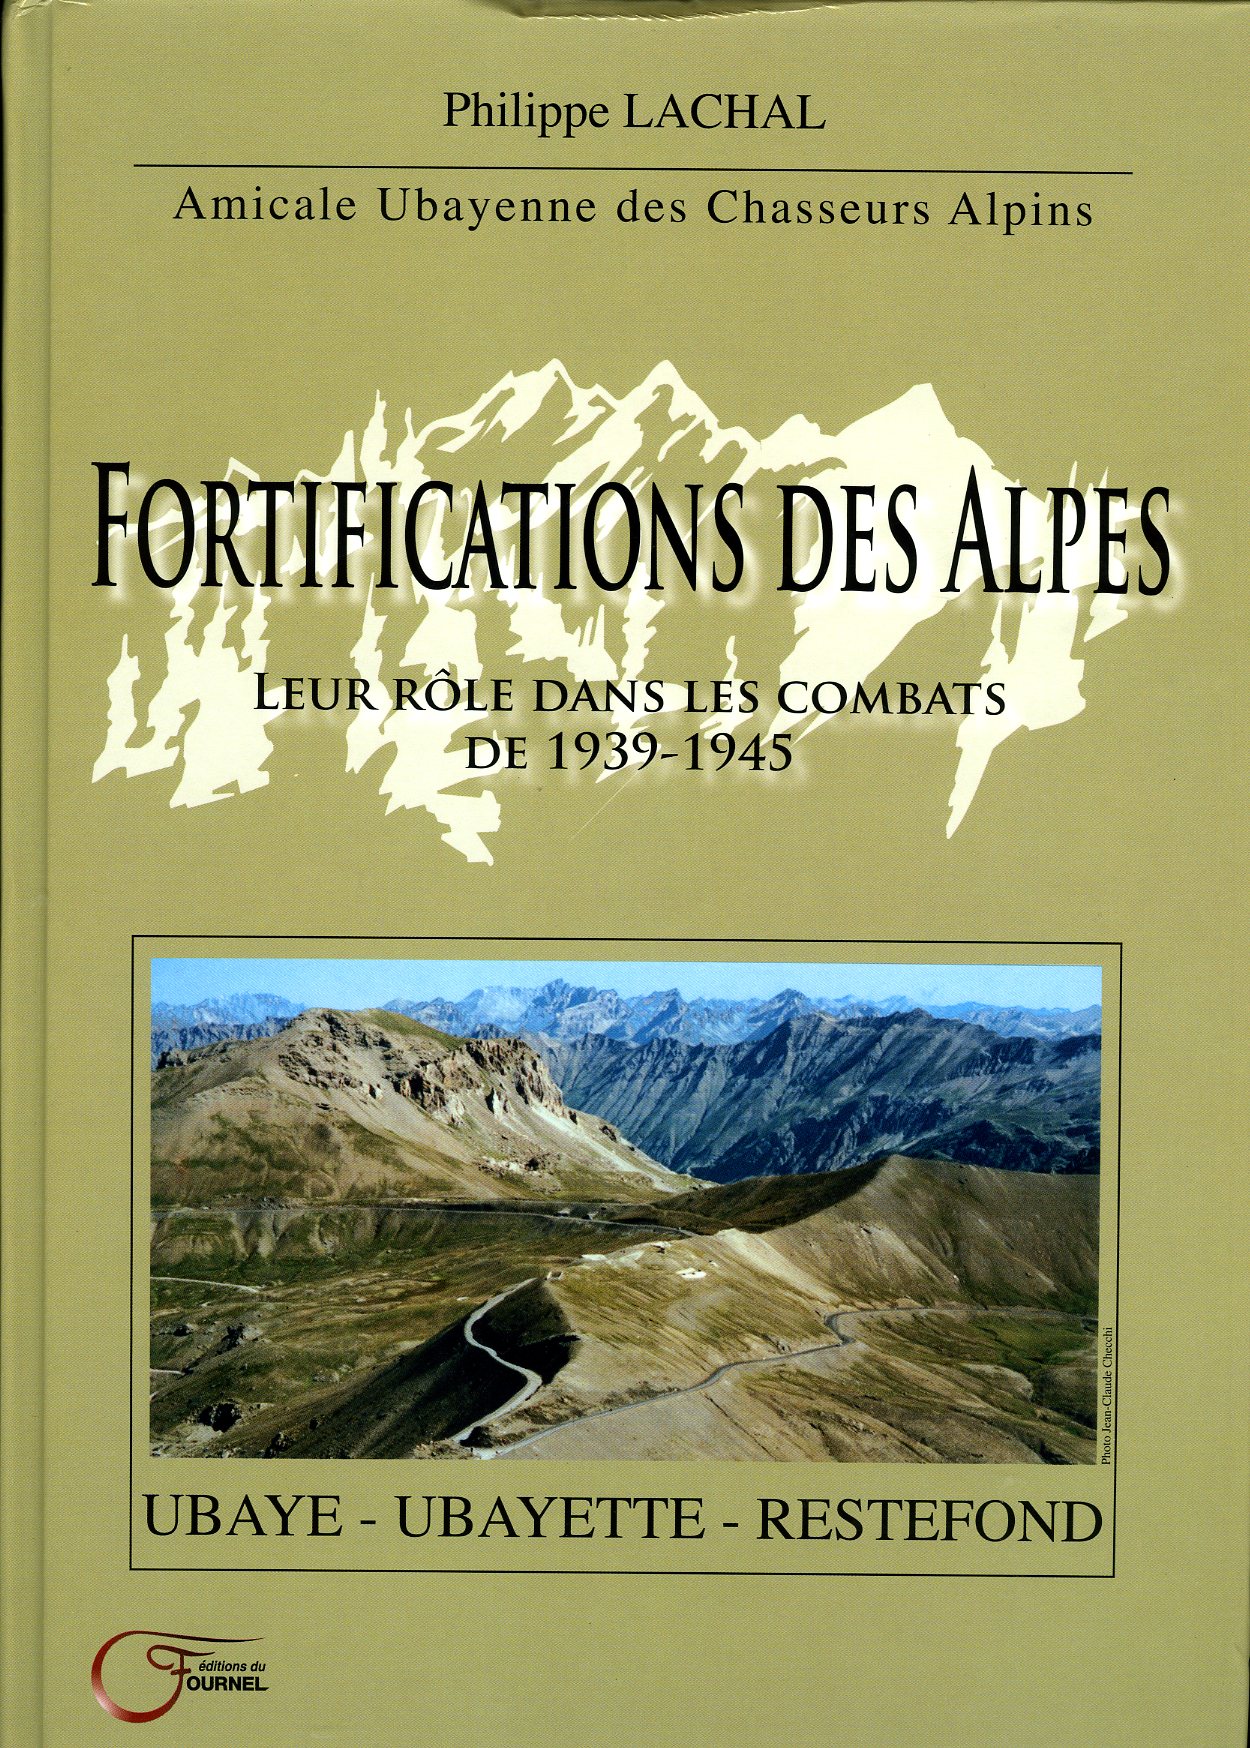 Livre - Fortifications des Alpes - Ubaye-Ubayette-Restefond (LACHAL, Philippe) - LACHAL, Philippe